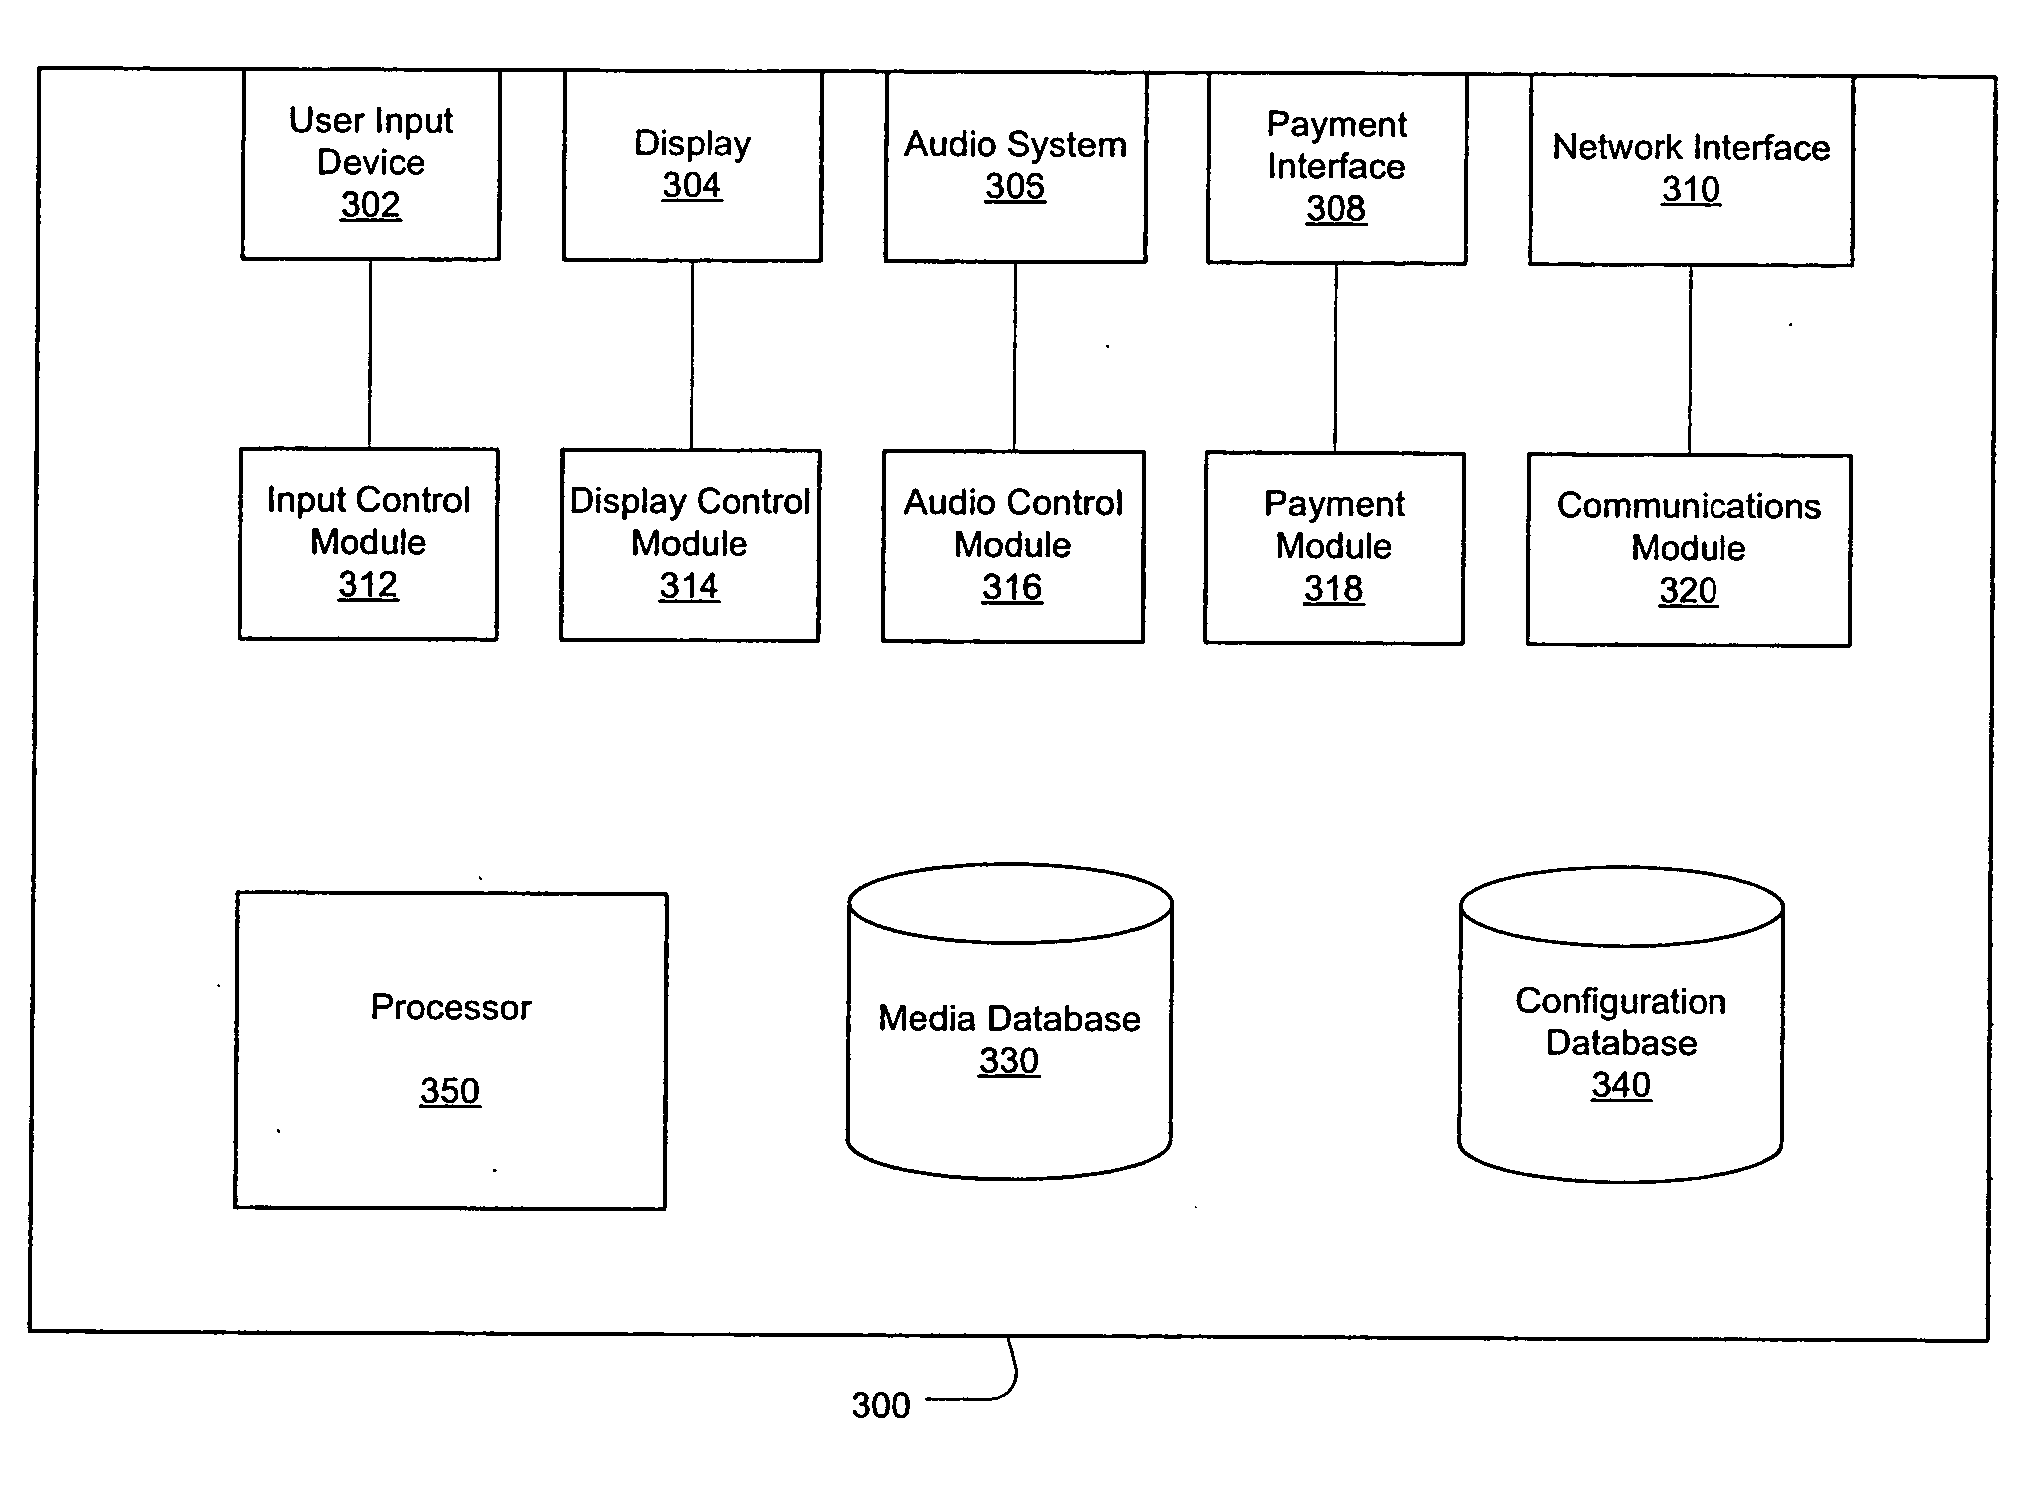 Distributed configuration of entertainment devices